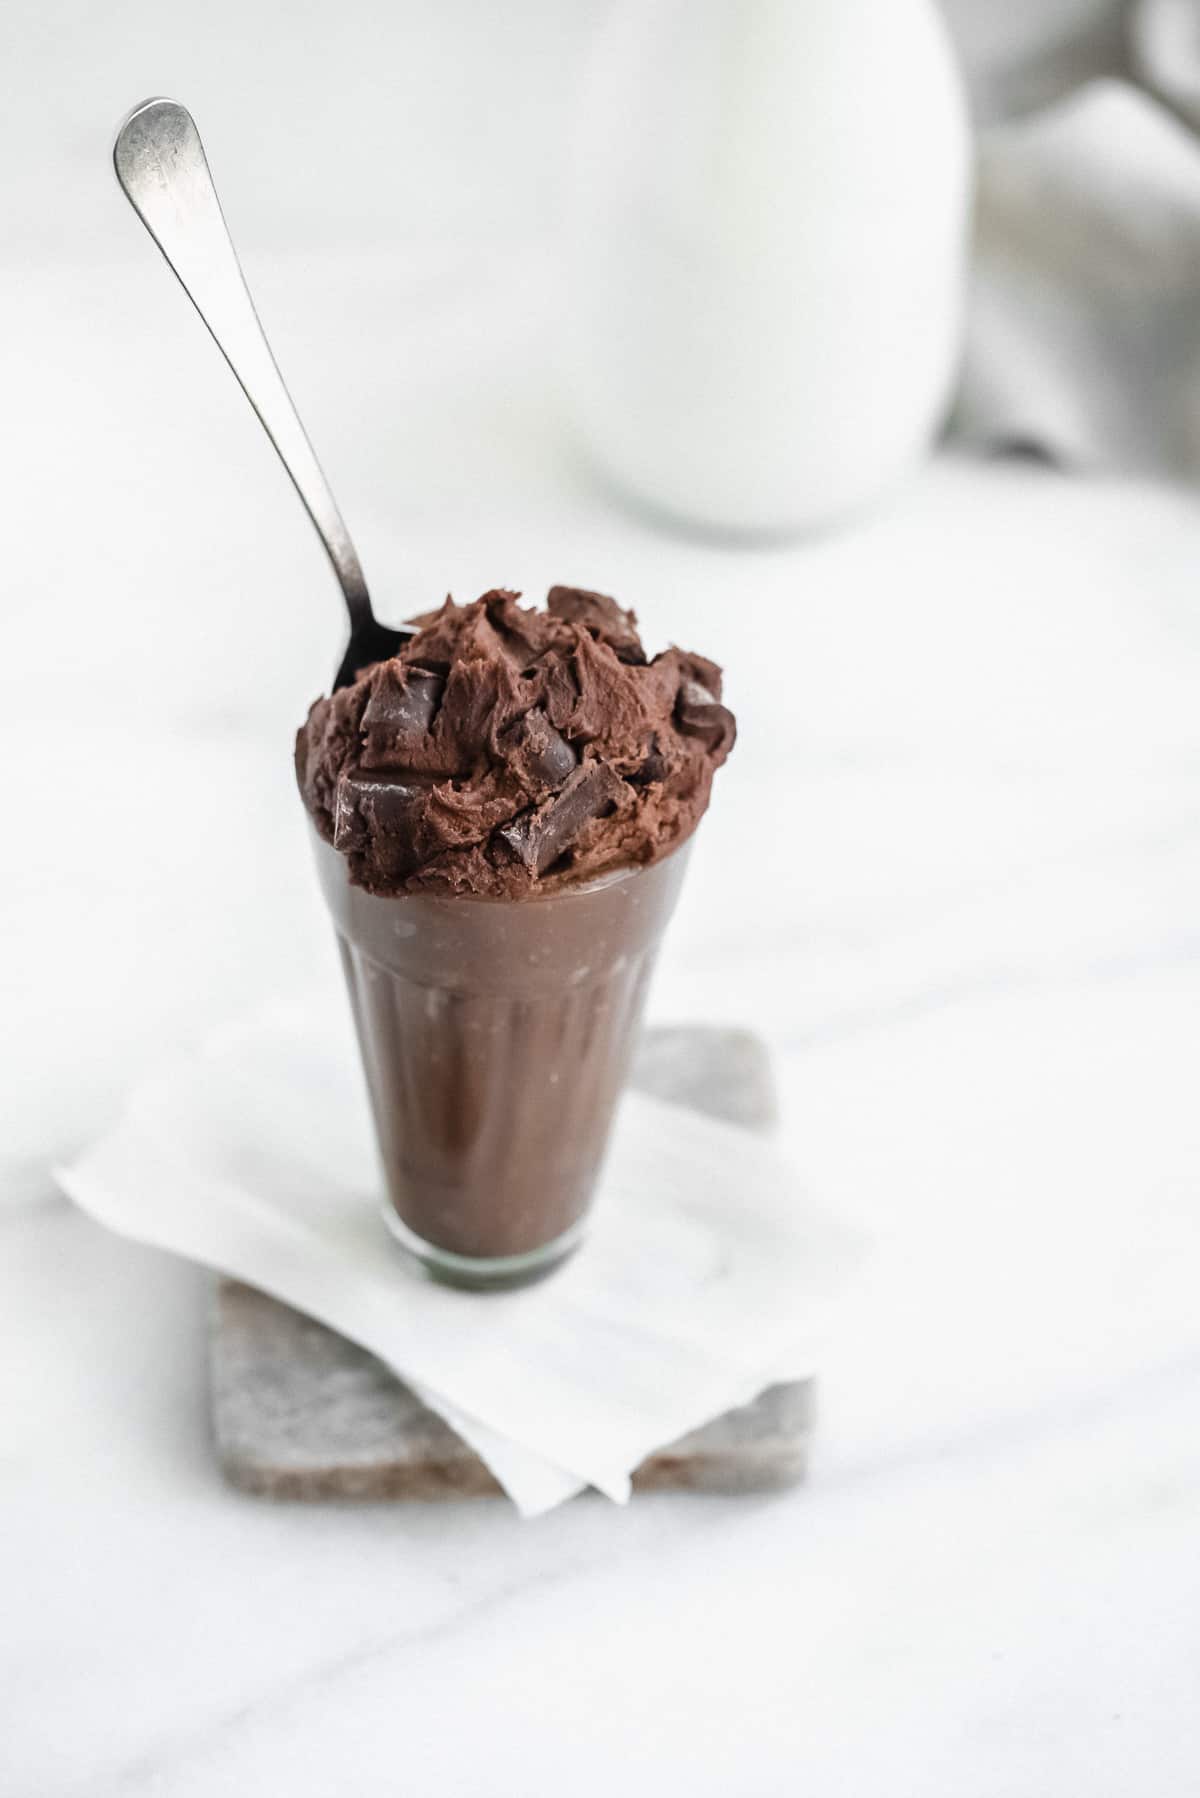 Glass full of edible brownie batter with chocolate chunks in the top and a spoon inside the glass.